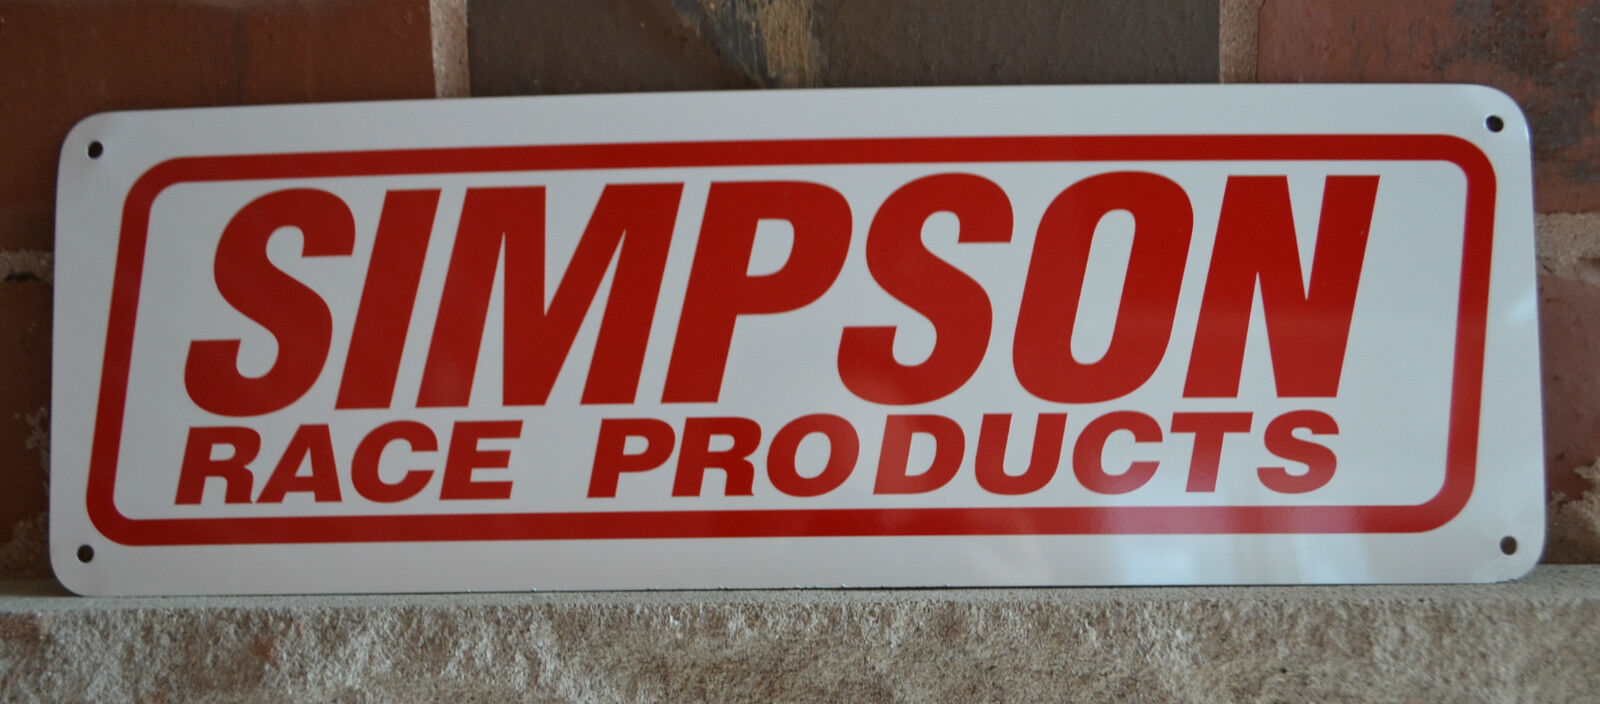 SIMPSON RACE PRODUCTS RACING GEAR ADVERTISING LOGO GARGE SIGN HOTROD DRAGSTER 10